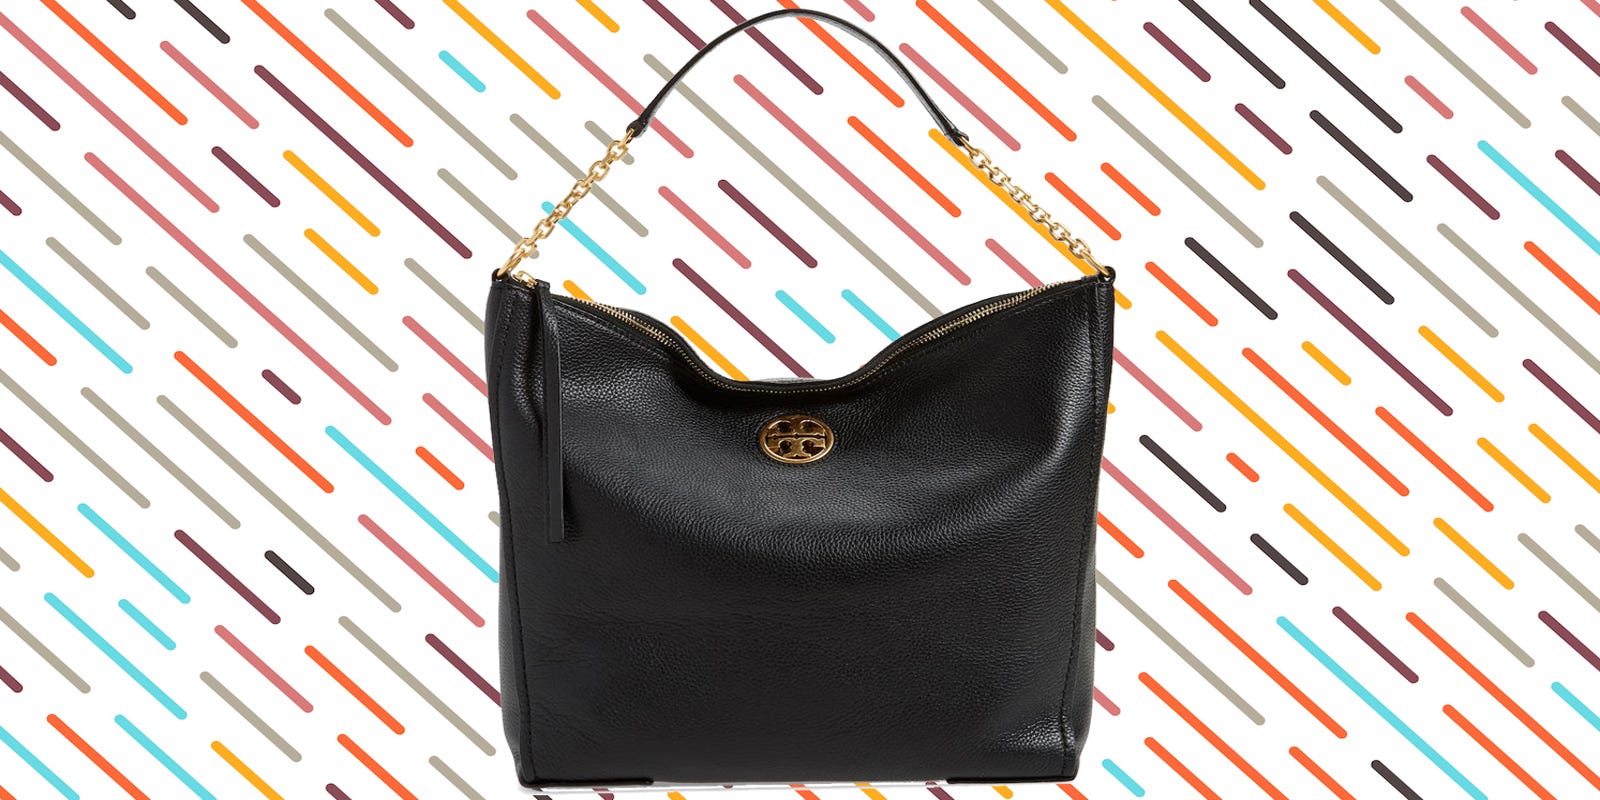 Nordstrom Anniversary Sale: Save on Tory Burch boots, bags and more